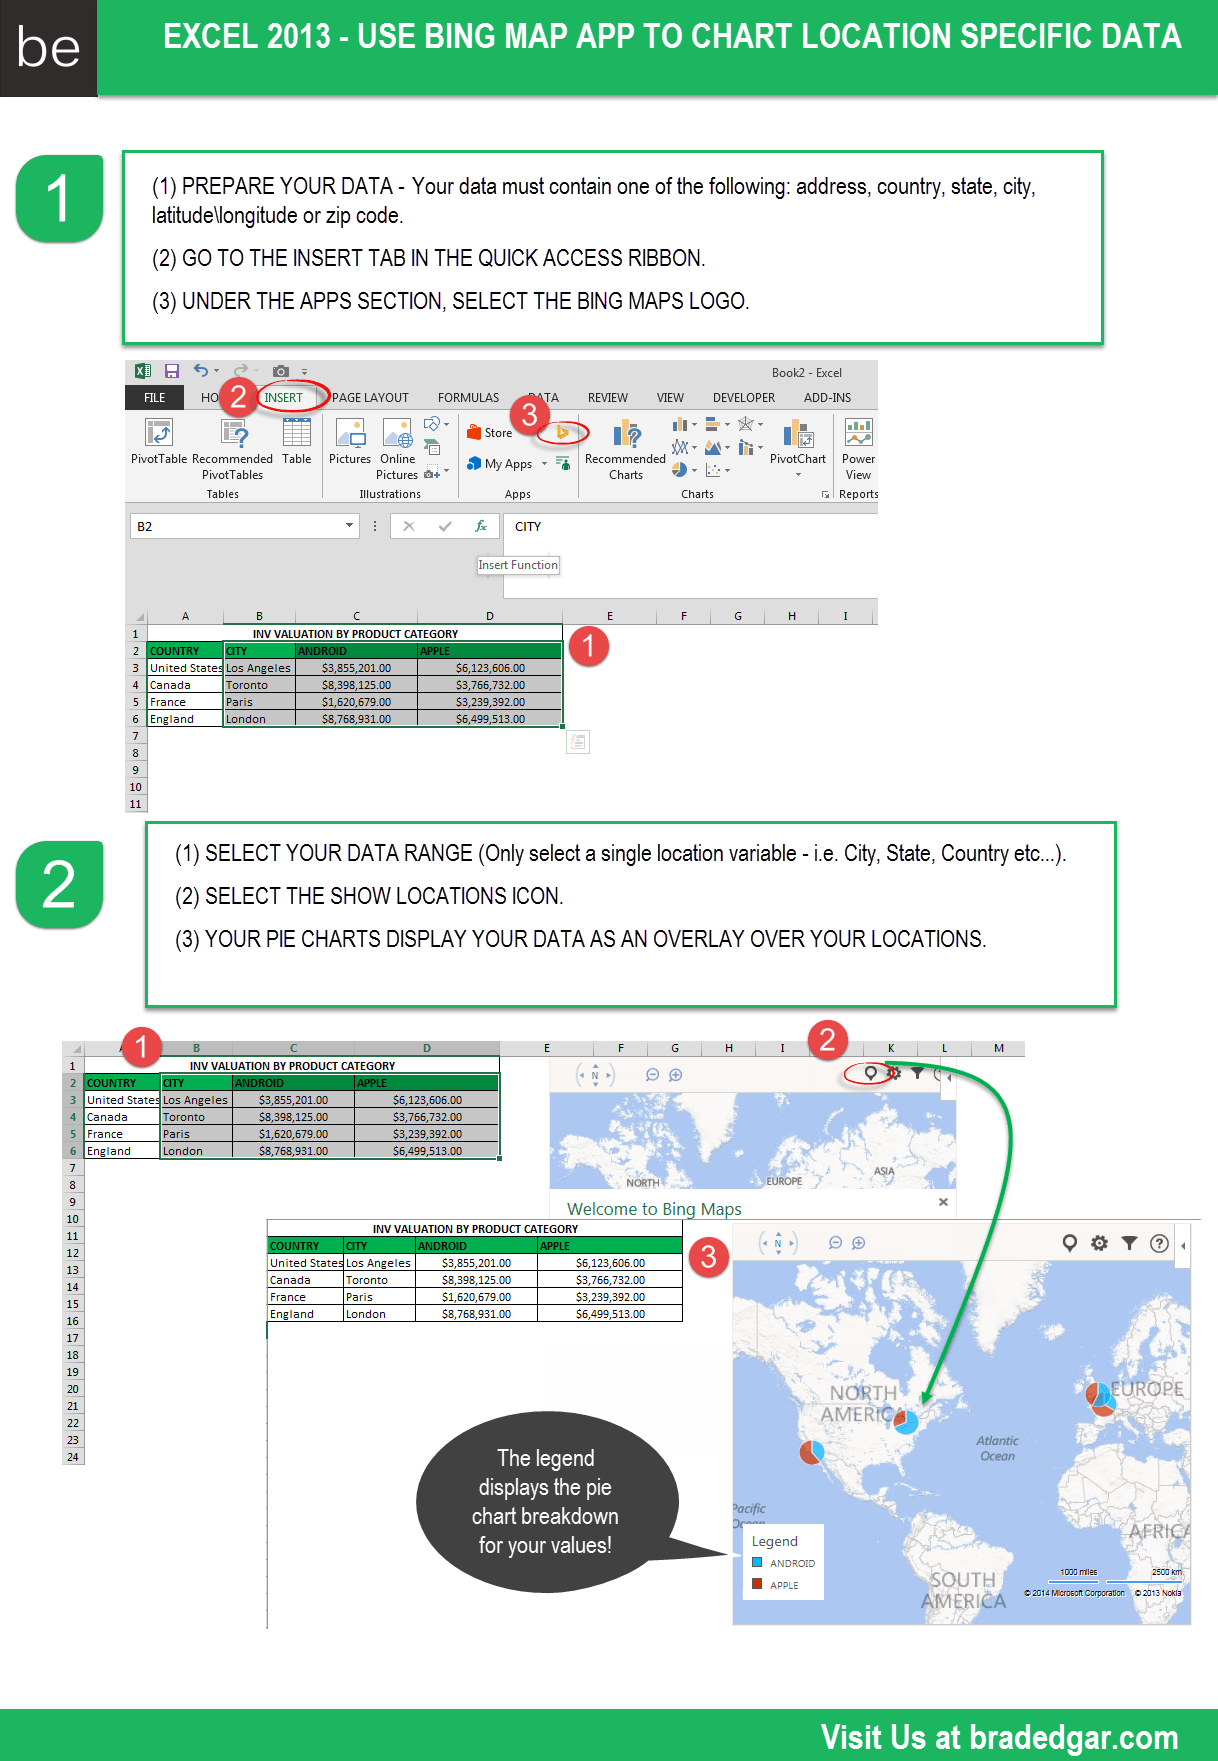 Bing Maps App Logo - Excel Dashboards! Awesome way to use Bing Maps to create and chart